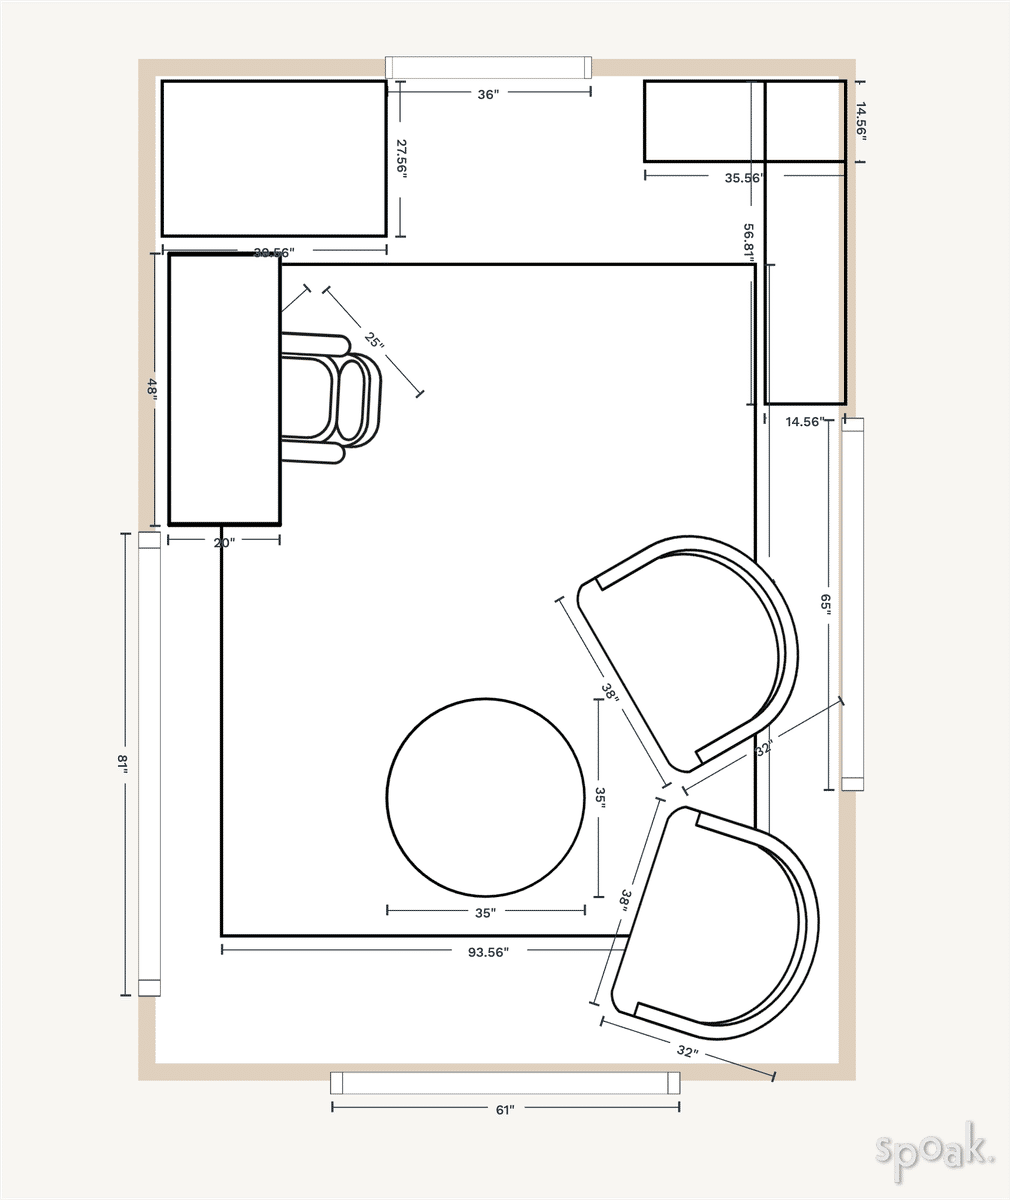 Office Layout designed by Morgan Dowling